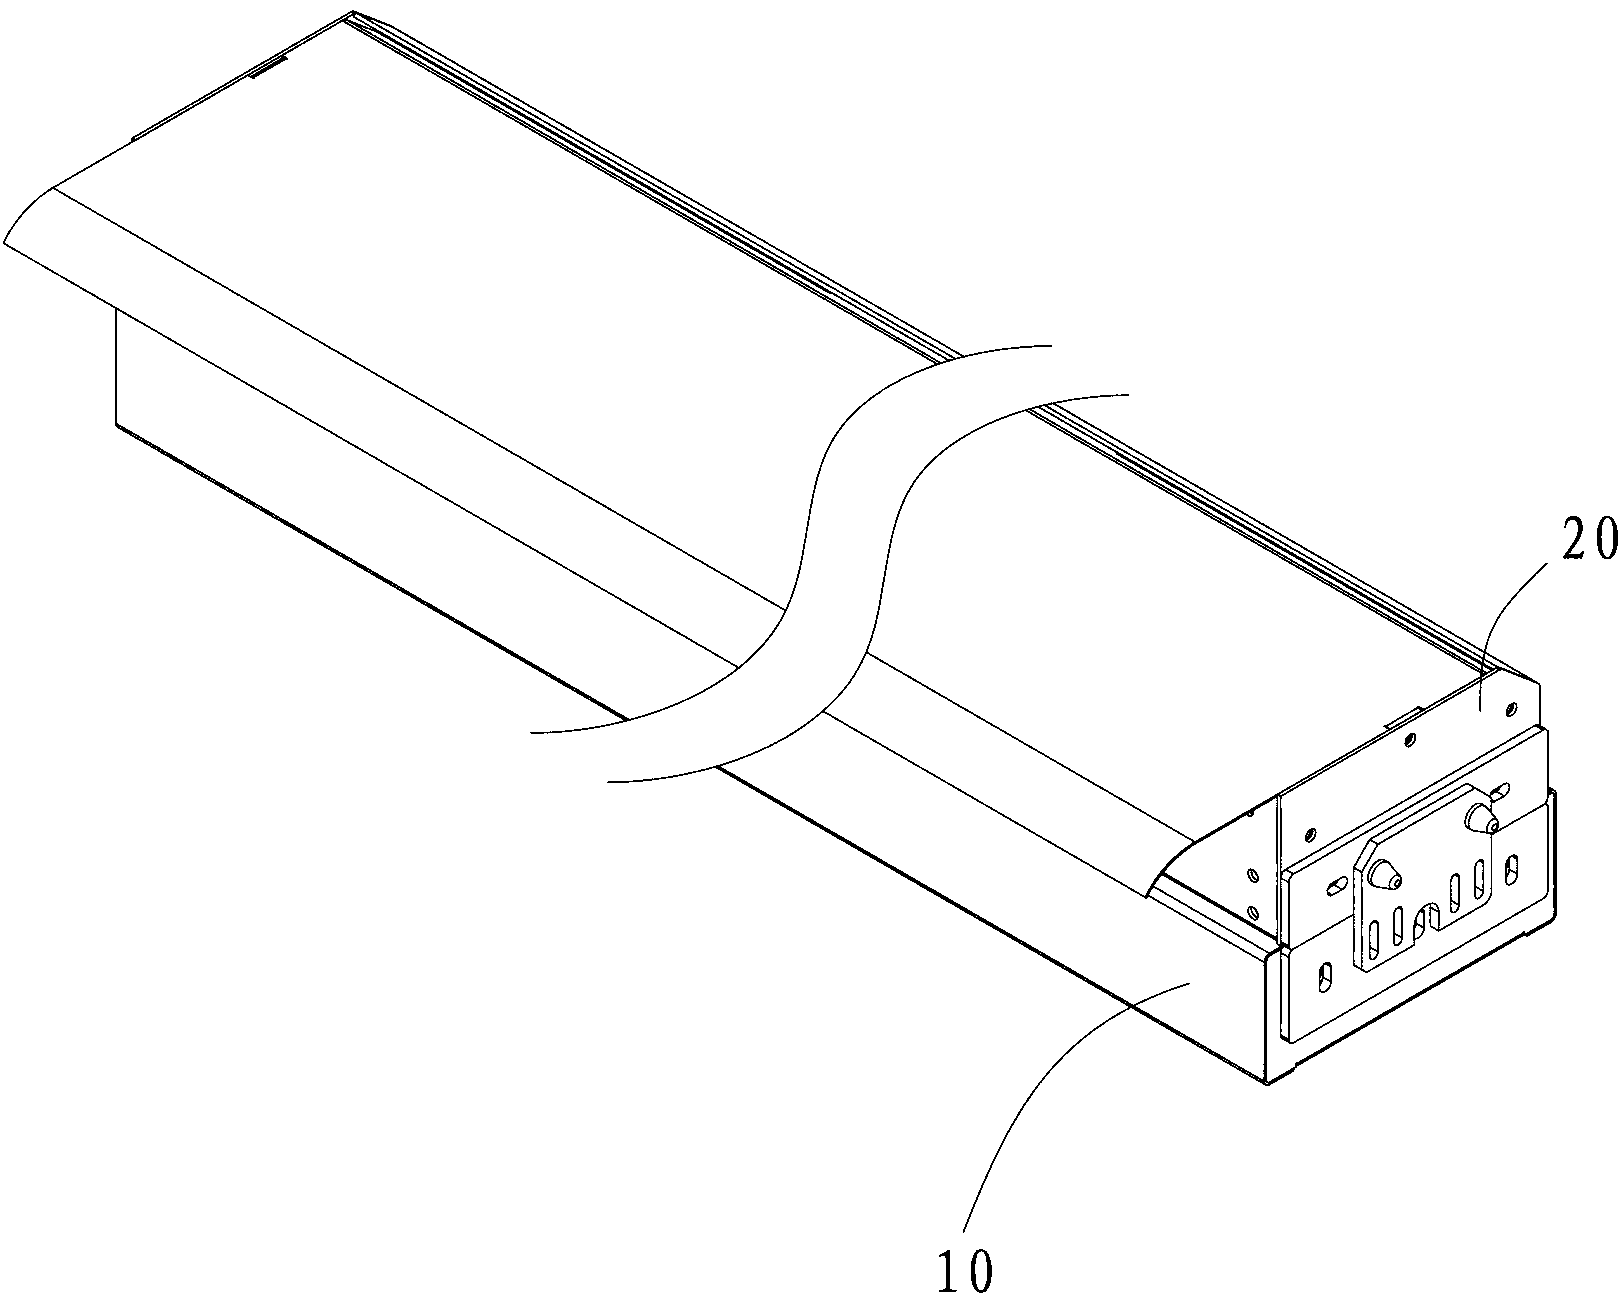 Single-side-blow air nozzle and drying oven with same